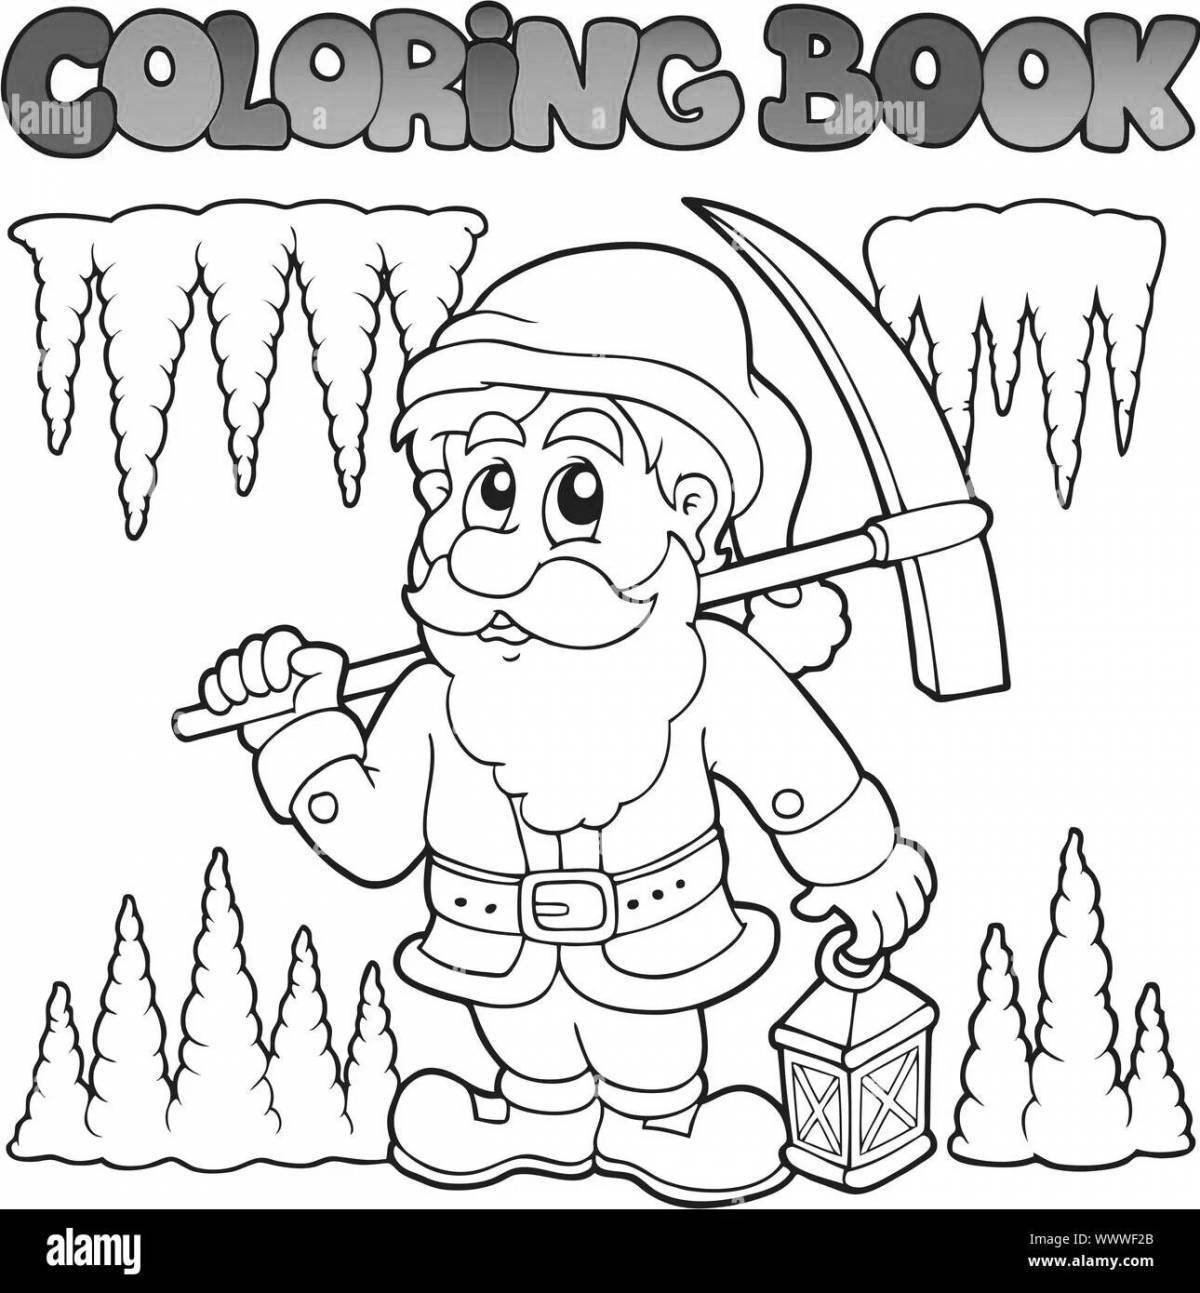 Colouring funny miner for kids